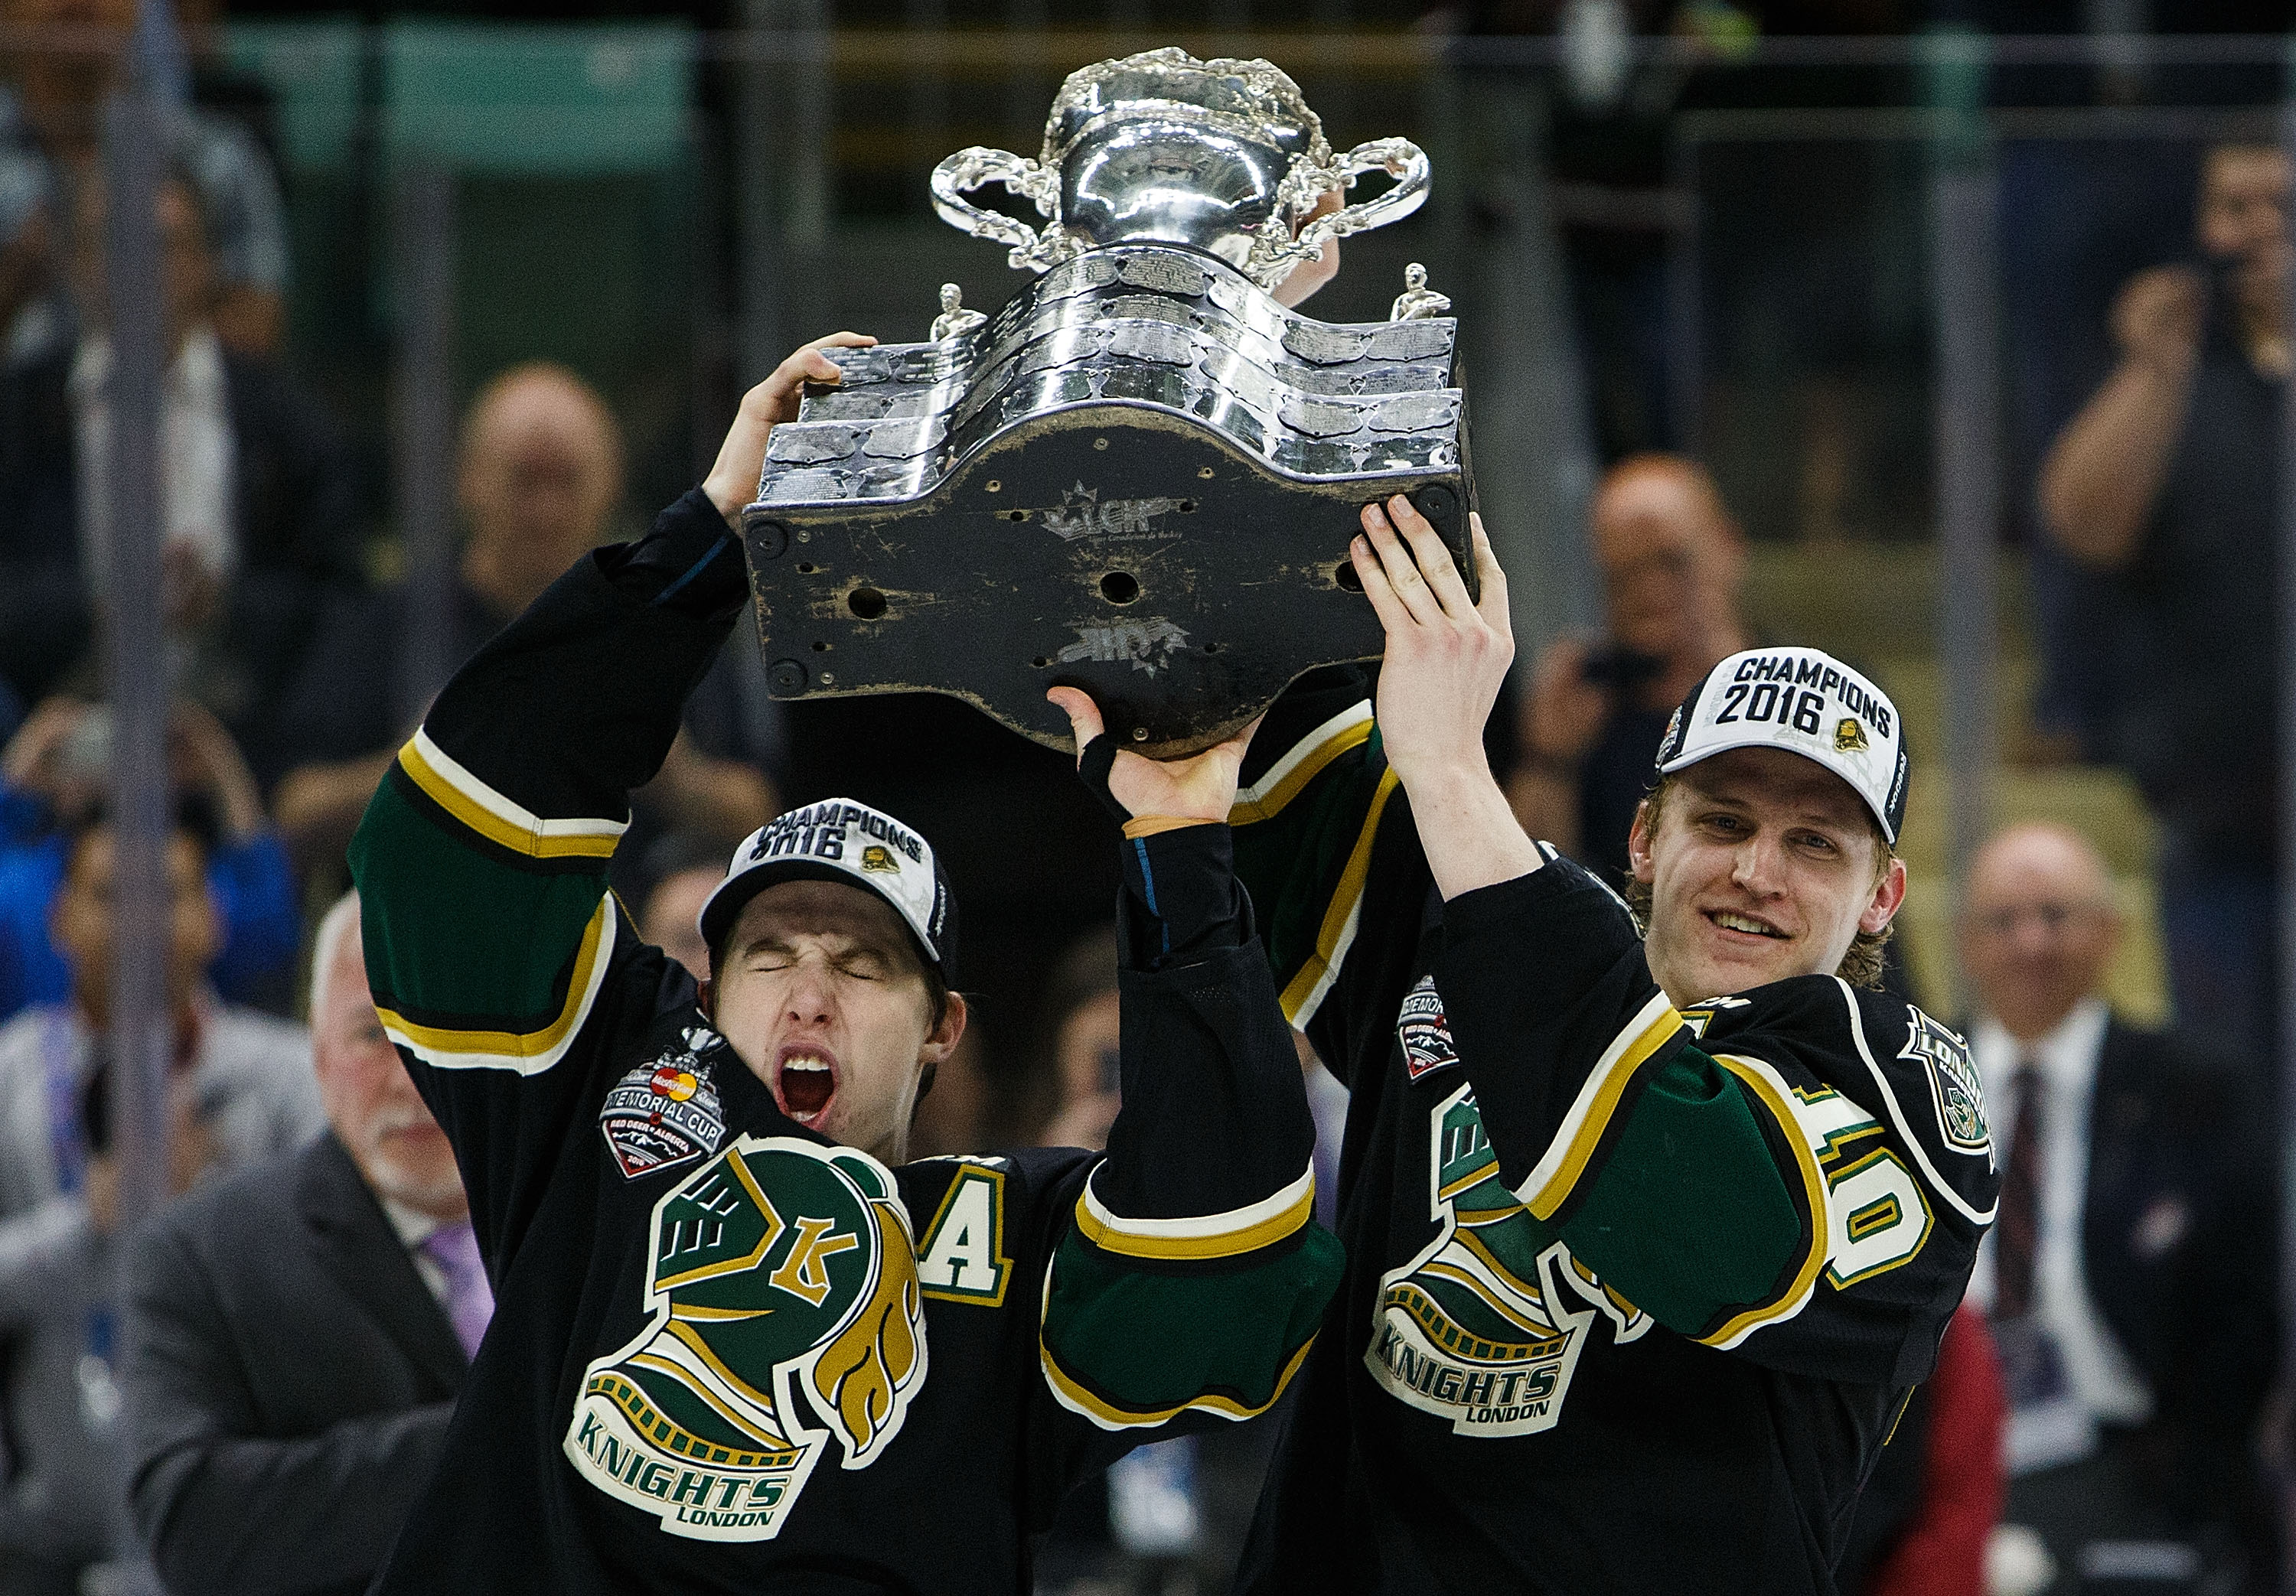 Mitchell Marner #93 and Christian Dvorak #10 of the London Knights (OHL) celebrate after defeating the Rouyn-Noranda Huskies (QMJHL) during the Memorial Cup Final on May 29, 2016 at the Enmax Centrium in Red Deer, Alberta, Canada.